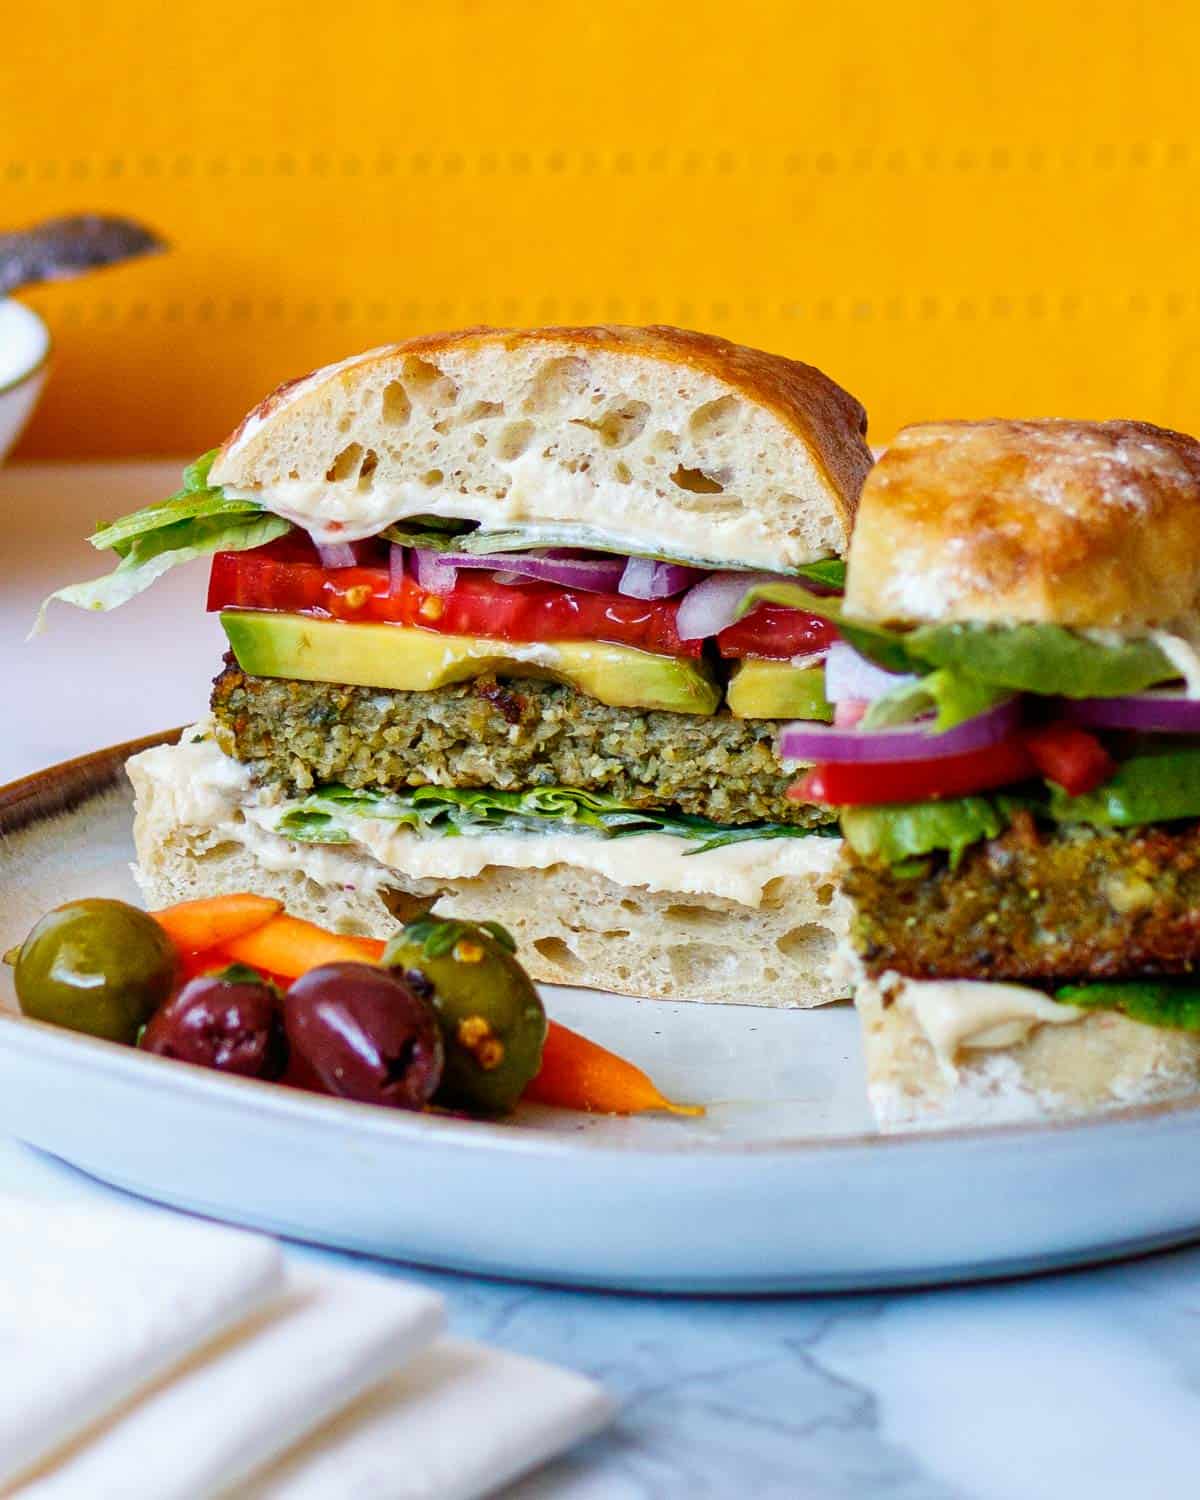 Falafel sandwich on a plate with carrots and olives.